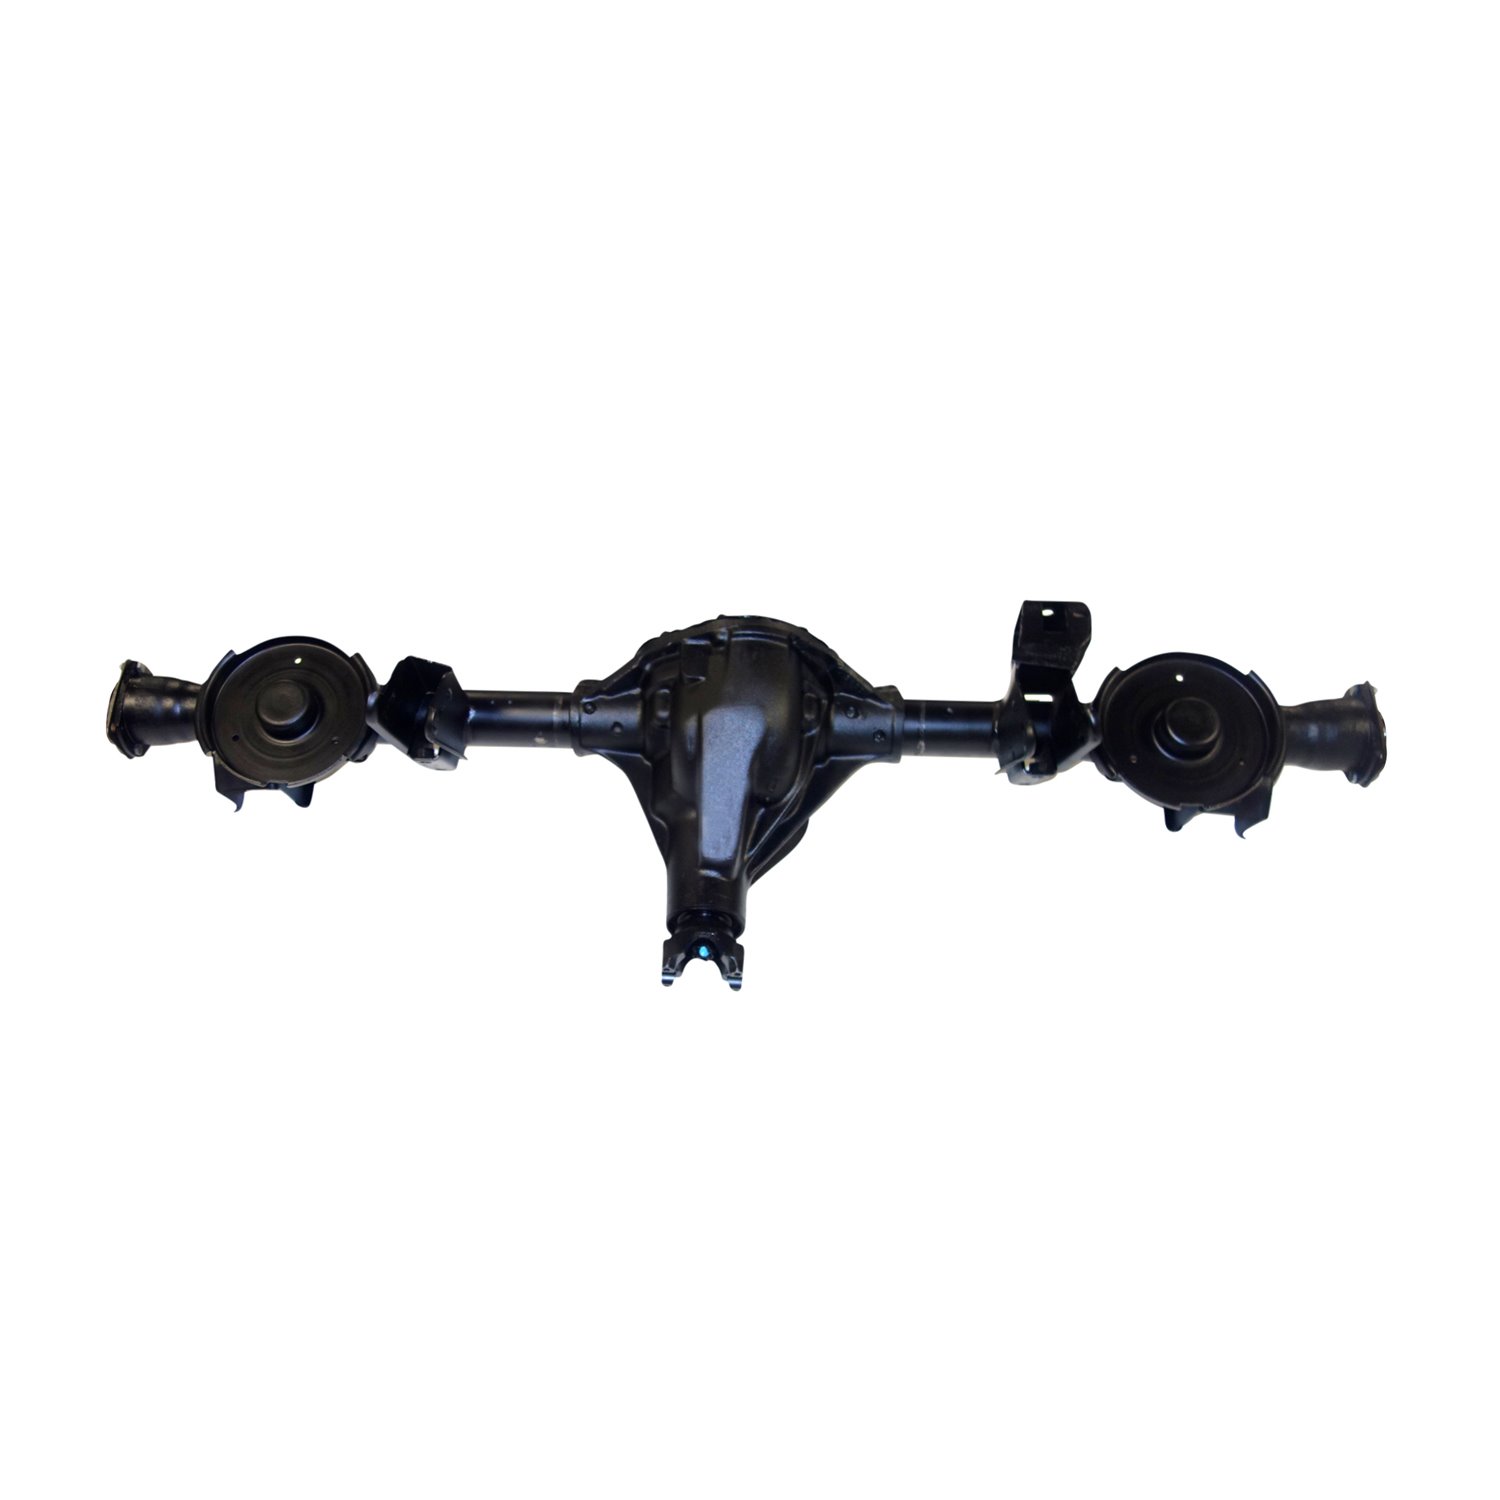 Remanufactured Complete Axle Assy for Chy 8.25" 2005 Grand Cherokee 3.73 with Varilock